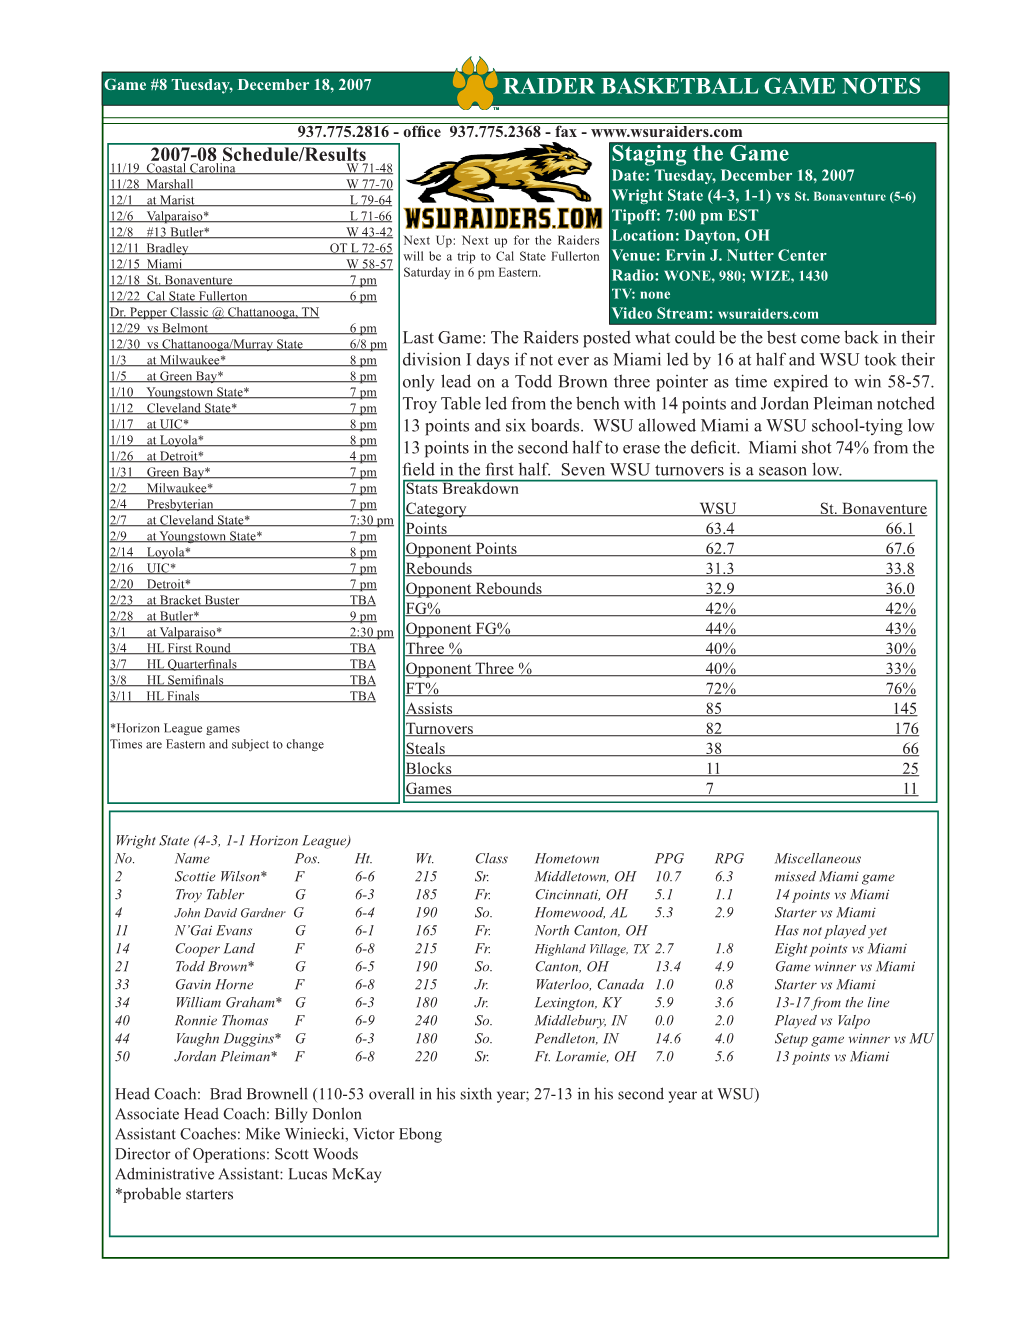 RAIDER BASKETBALL GAME NOTES Staging the Game